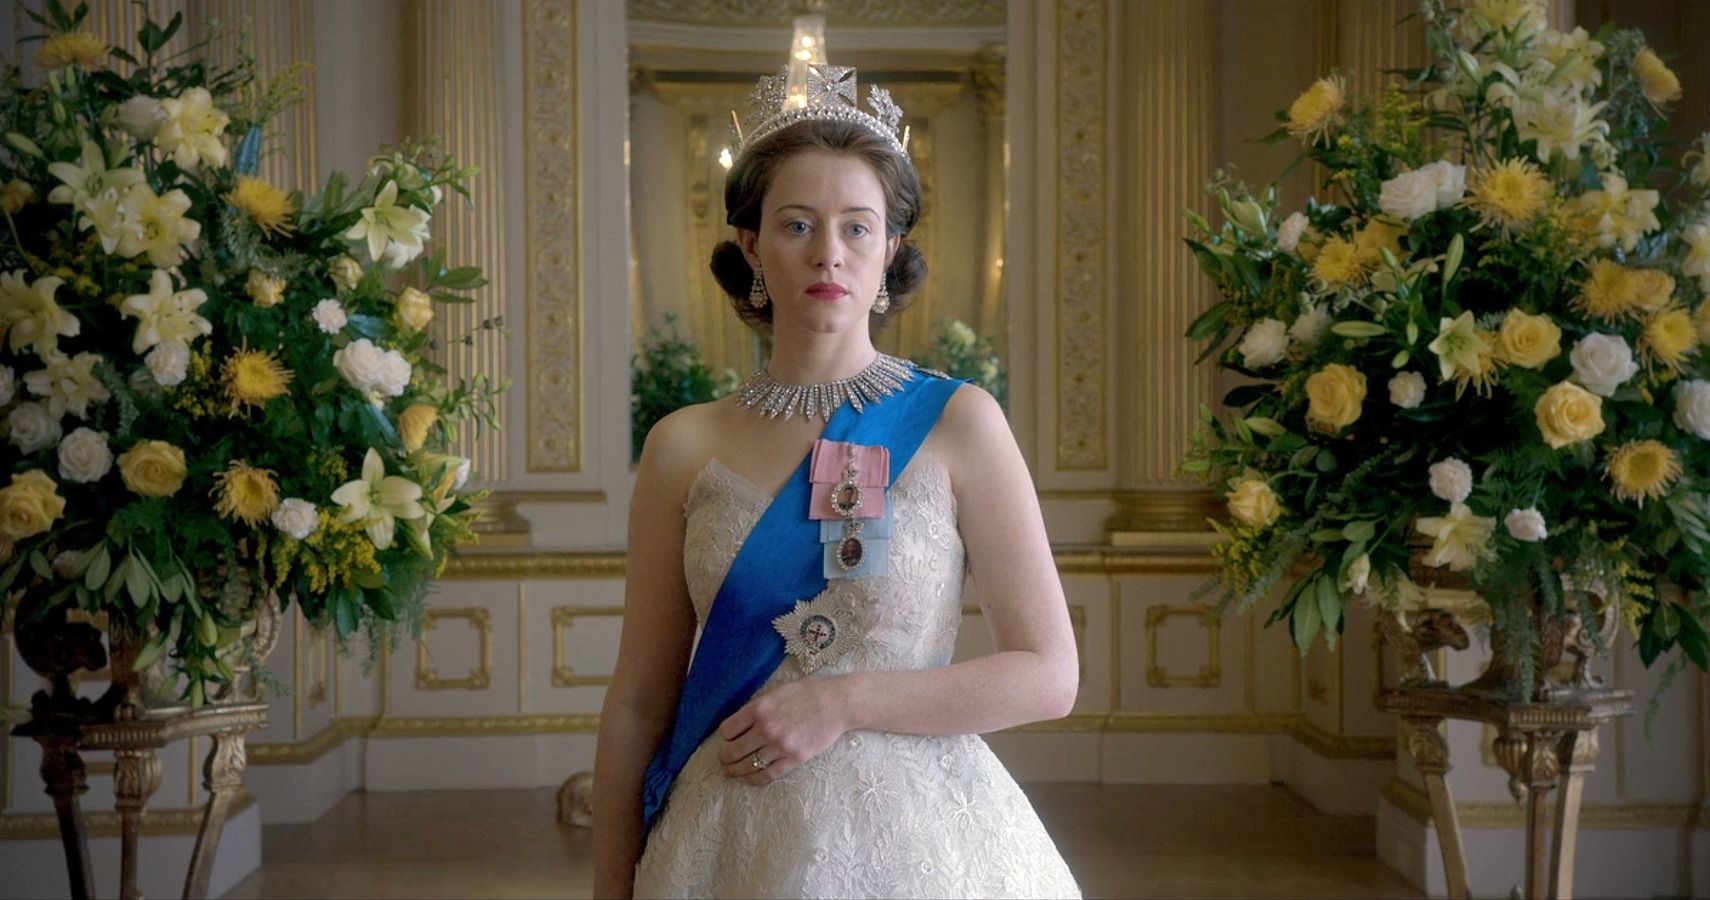 The Crown 10 Best Costumes On The Show Ranked